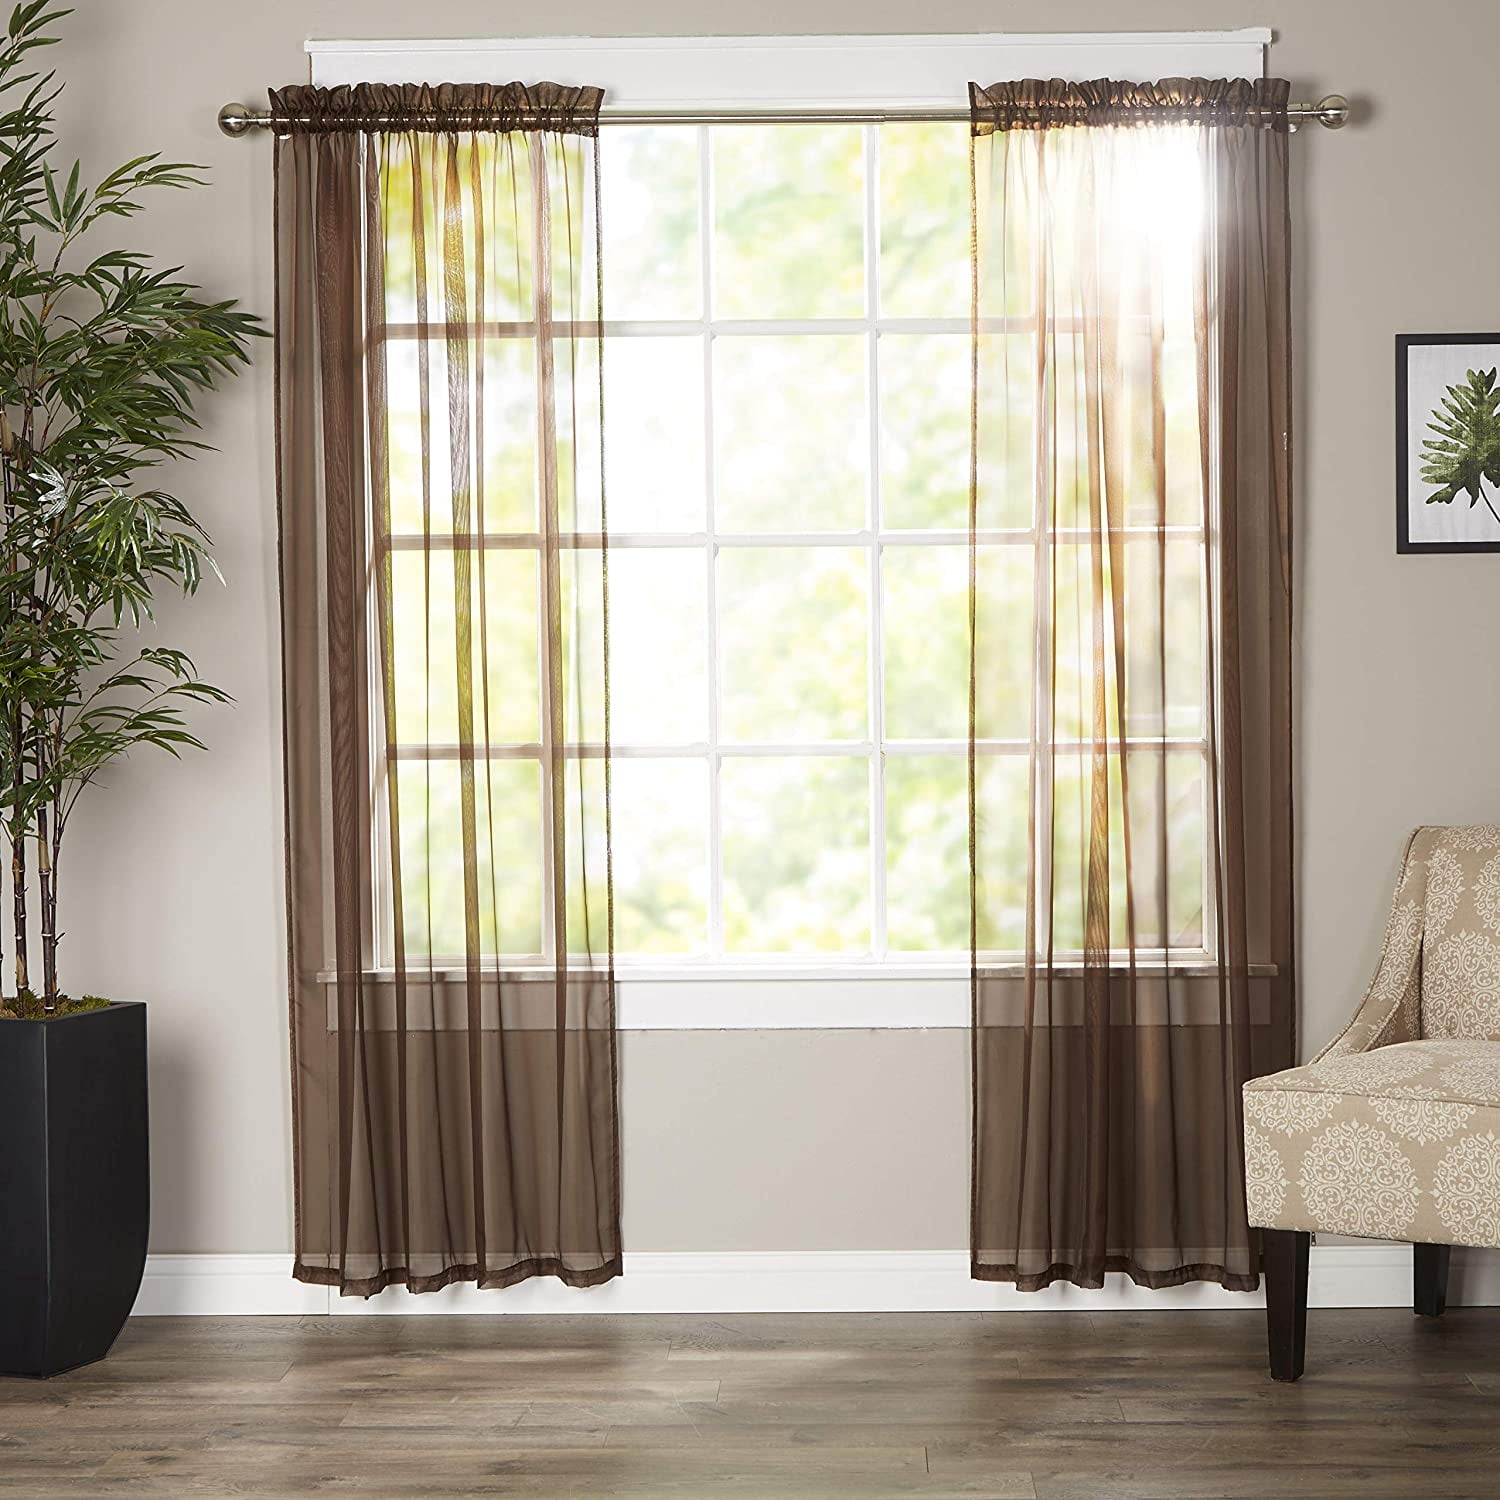 Pair of Window Curtains Panels Drapes For Home Decor Tulle Voile Sheer 60" x 84" 